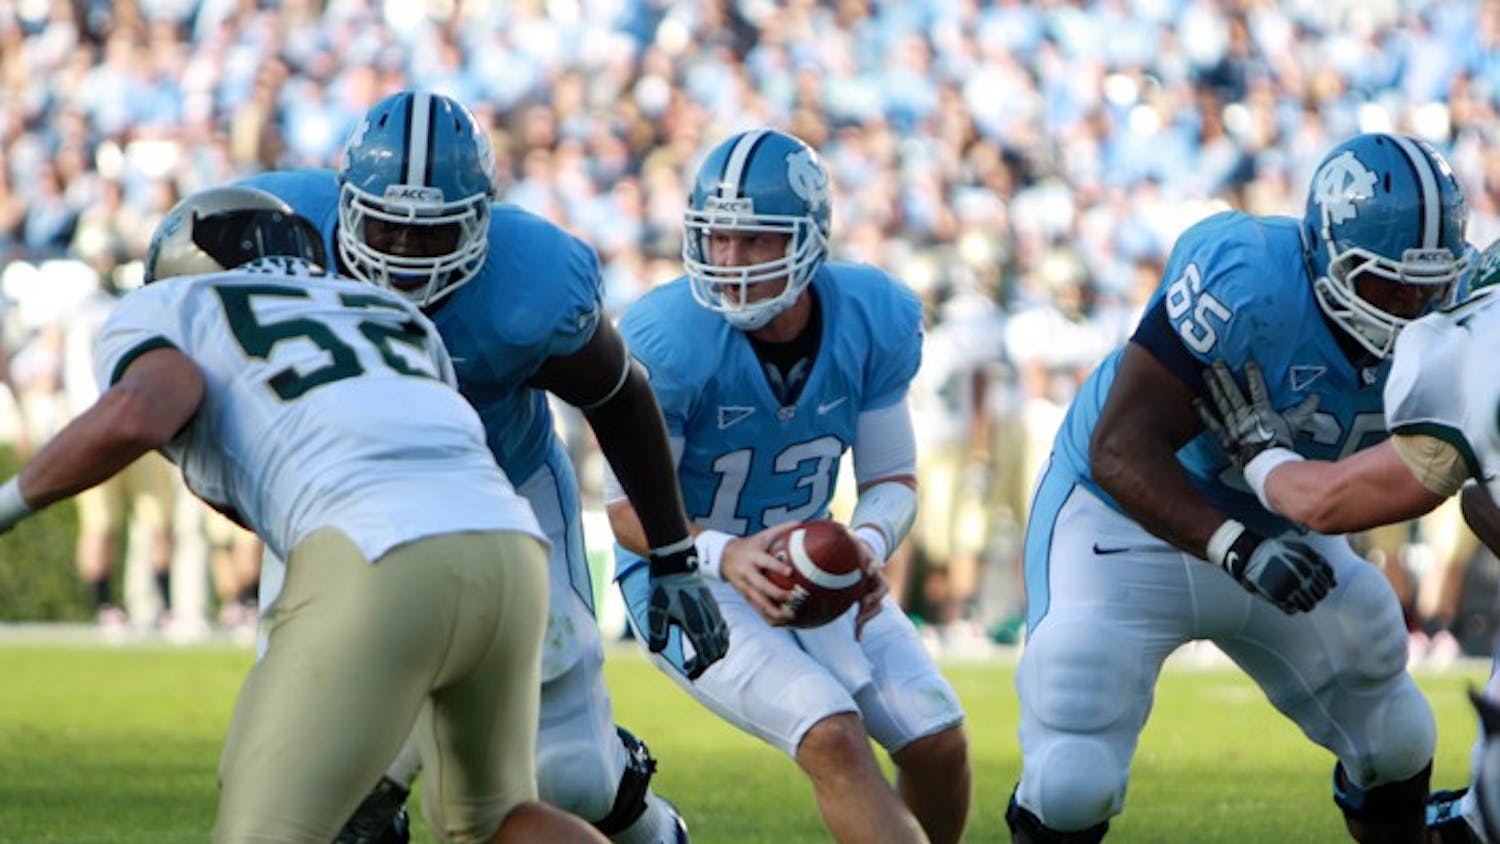 Members of UNC’s offensive line collected themselves in the second half and gave quarterback T.J. Yates time to lead two fourth-quarter touchdown drives.